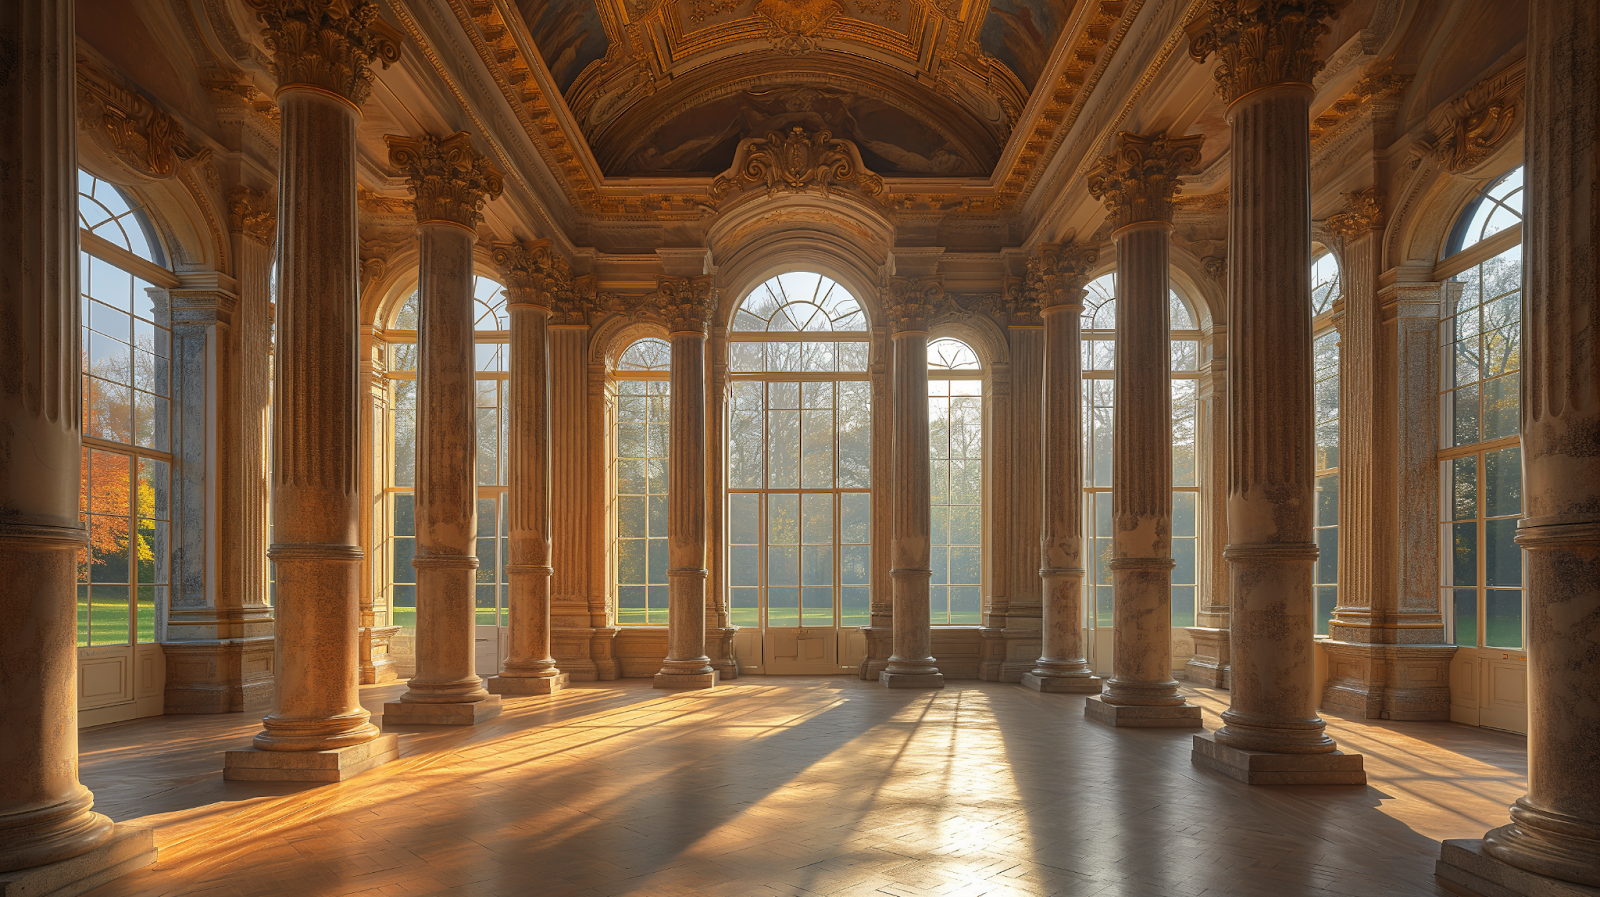 View inside the Sanssouci Palace in Potsdam, Germany